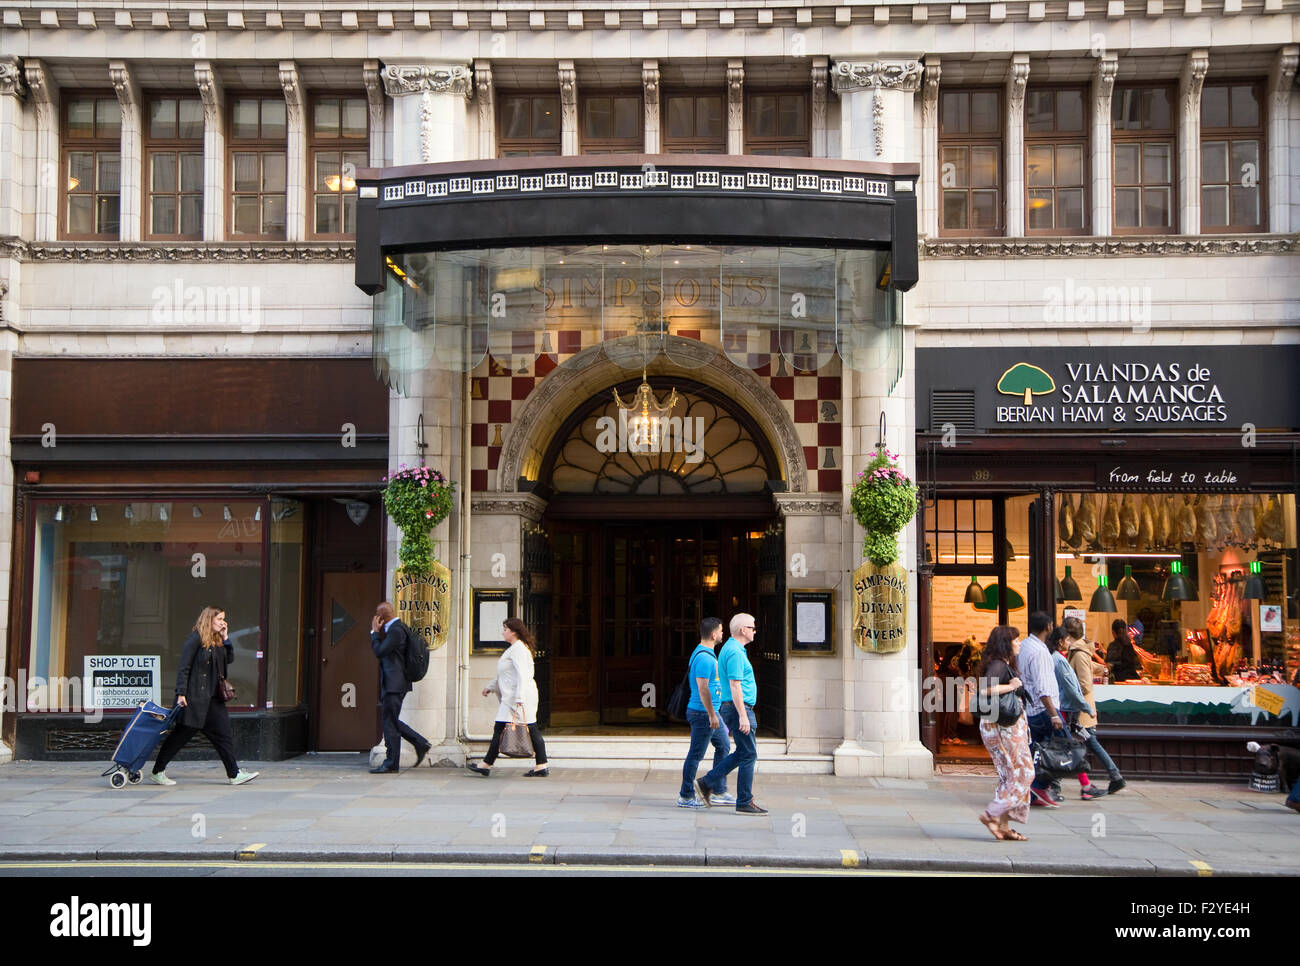 LONDON - SEPTEMBER 2ND: The exterior of Simpsoms on September the 2nd, 2015 in London, england, uk. The Simpsons Savoy savoy res Stock Photo